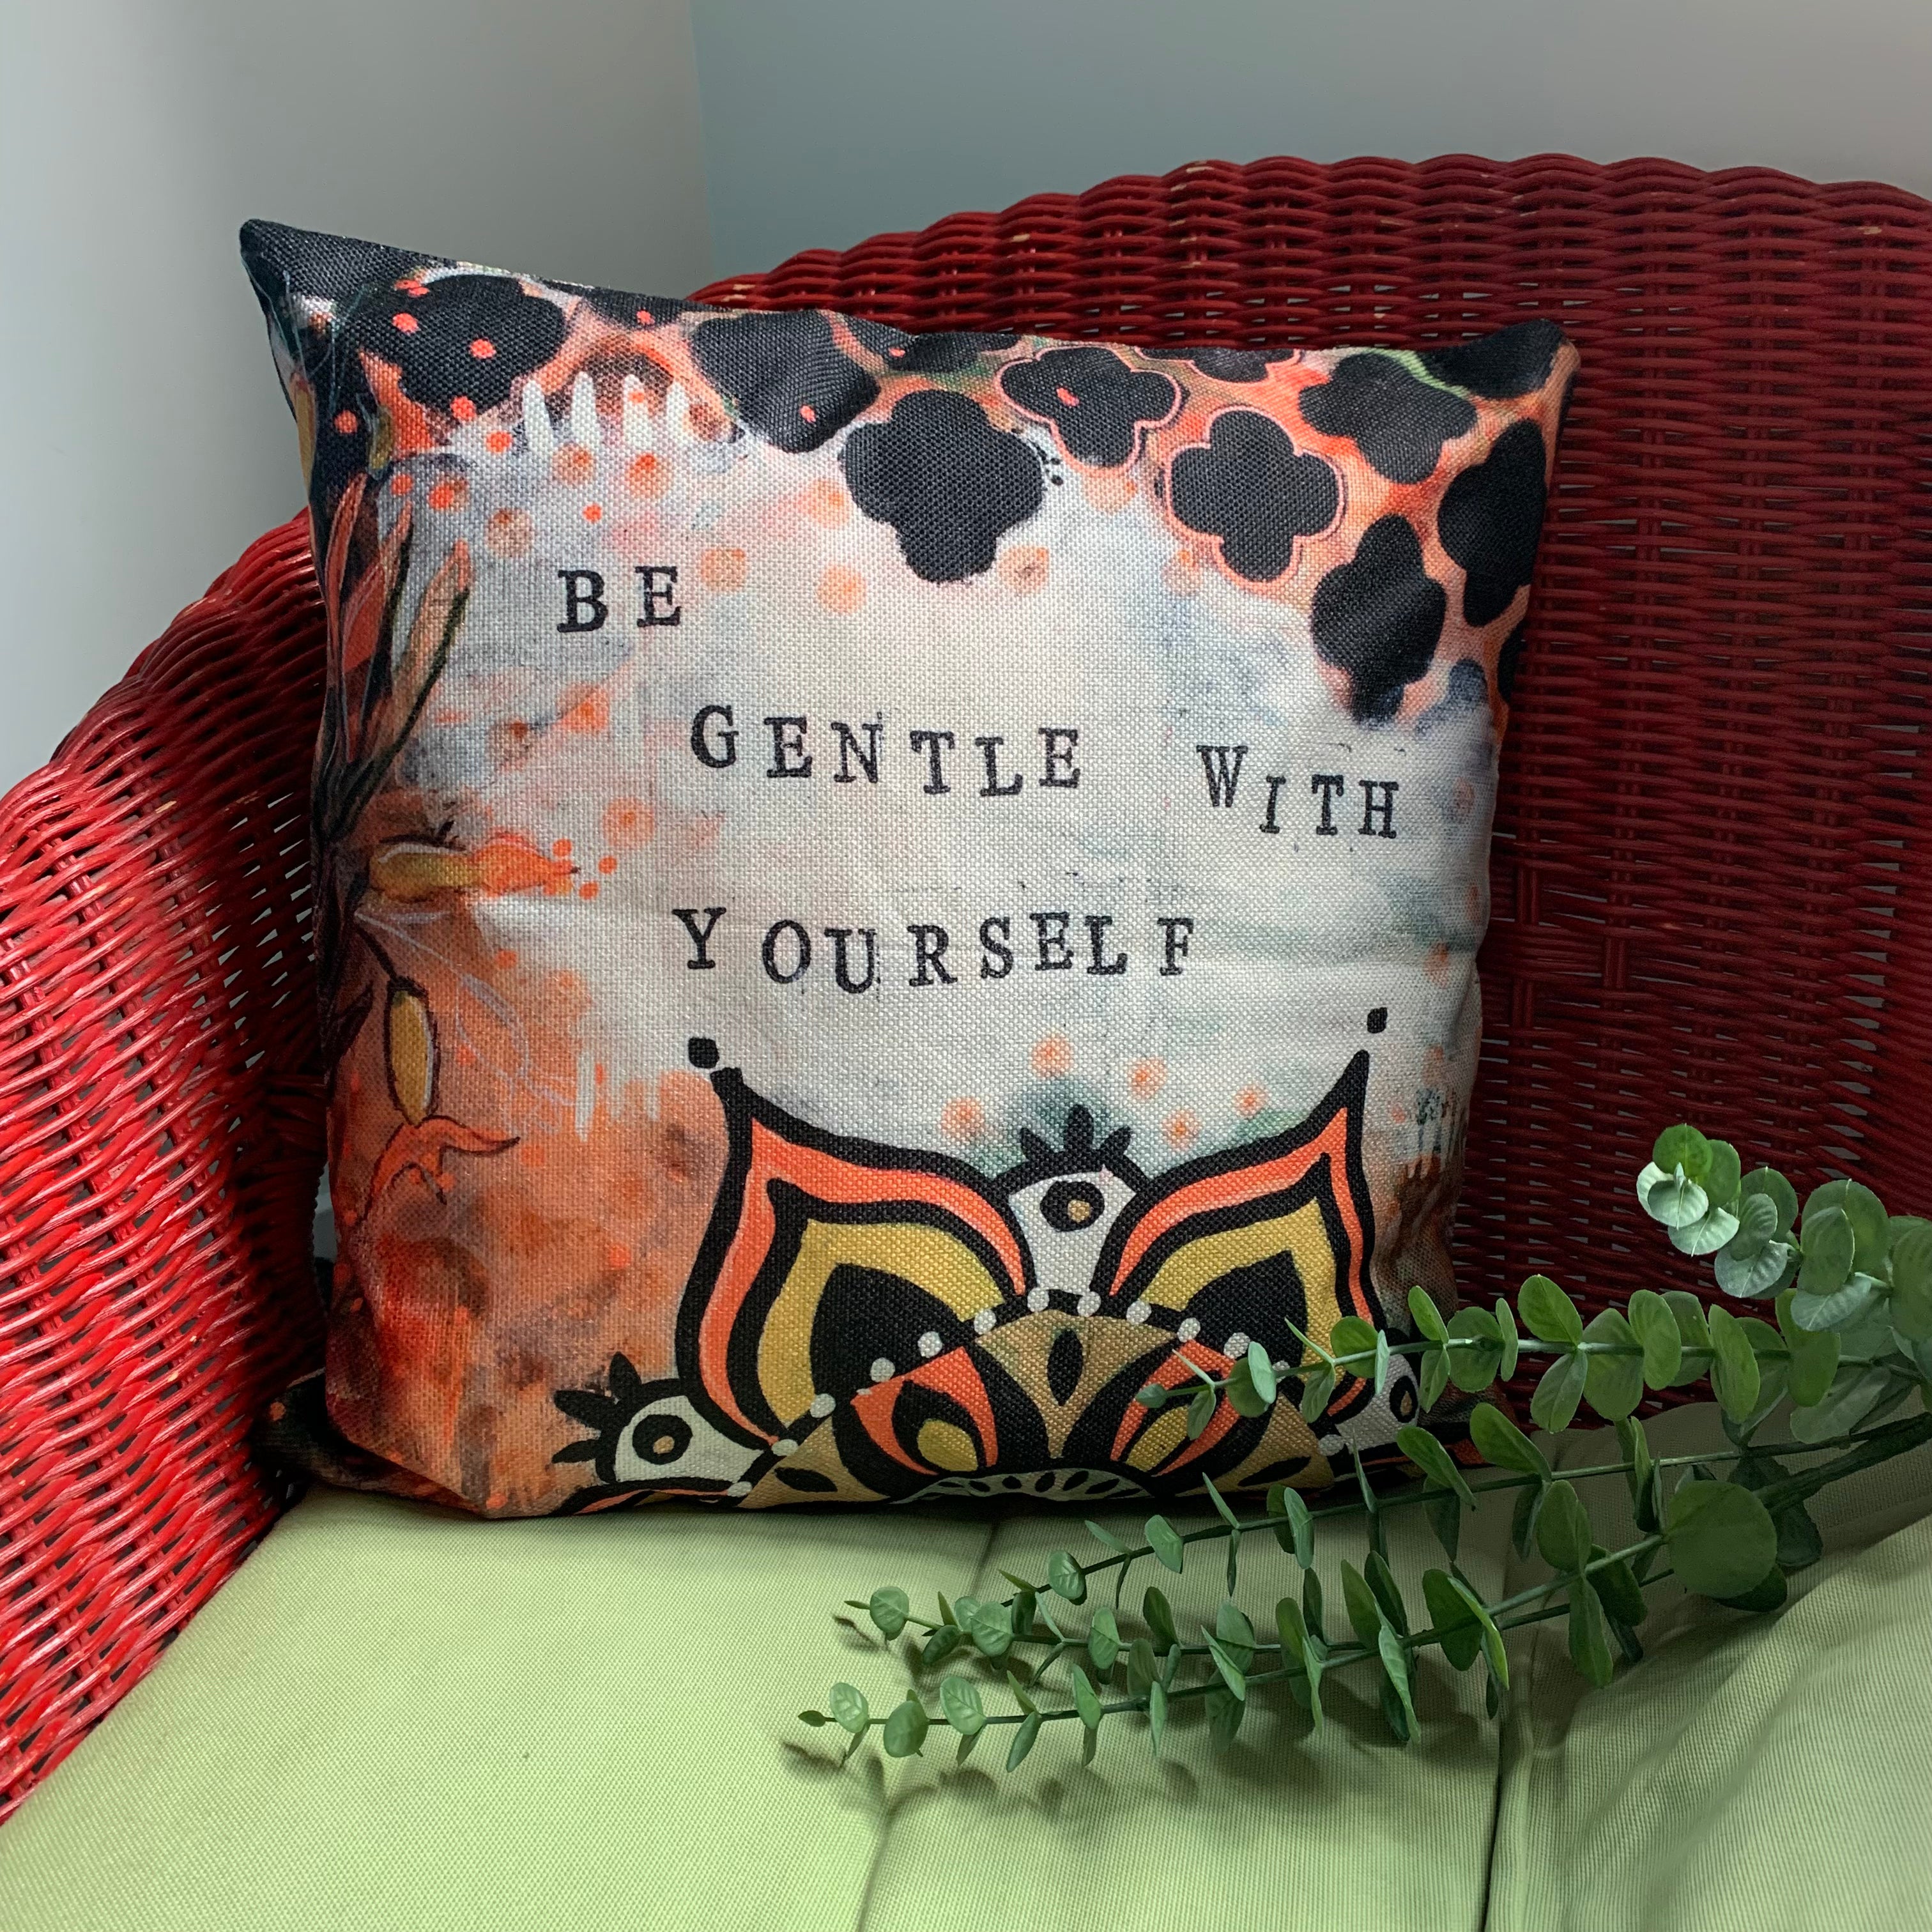 Be gentle with yourself positive affirmation scatter cushion by Adelien's Art